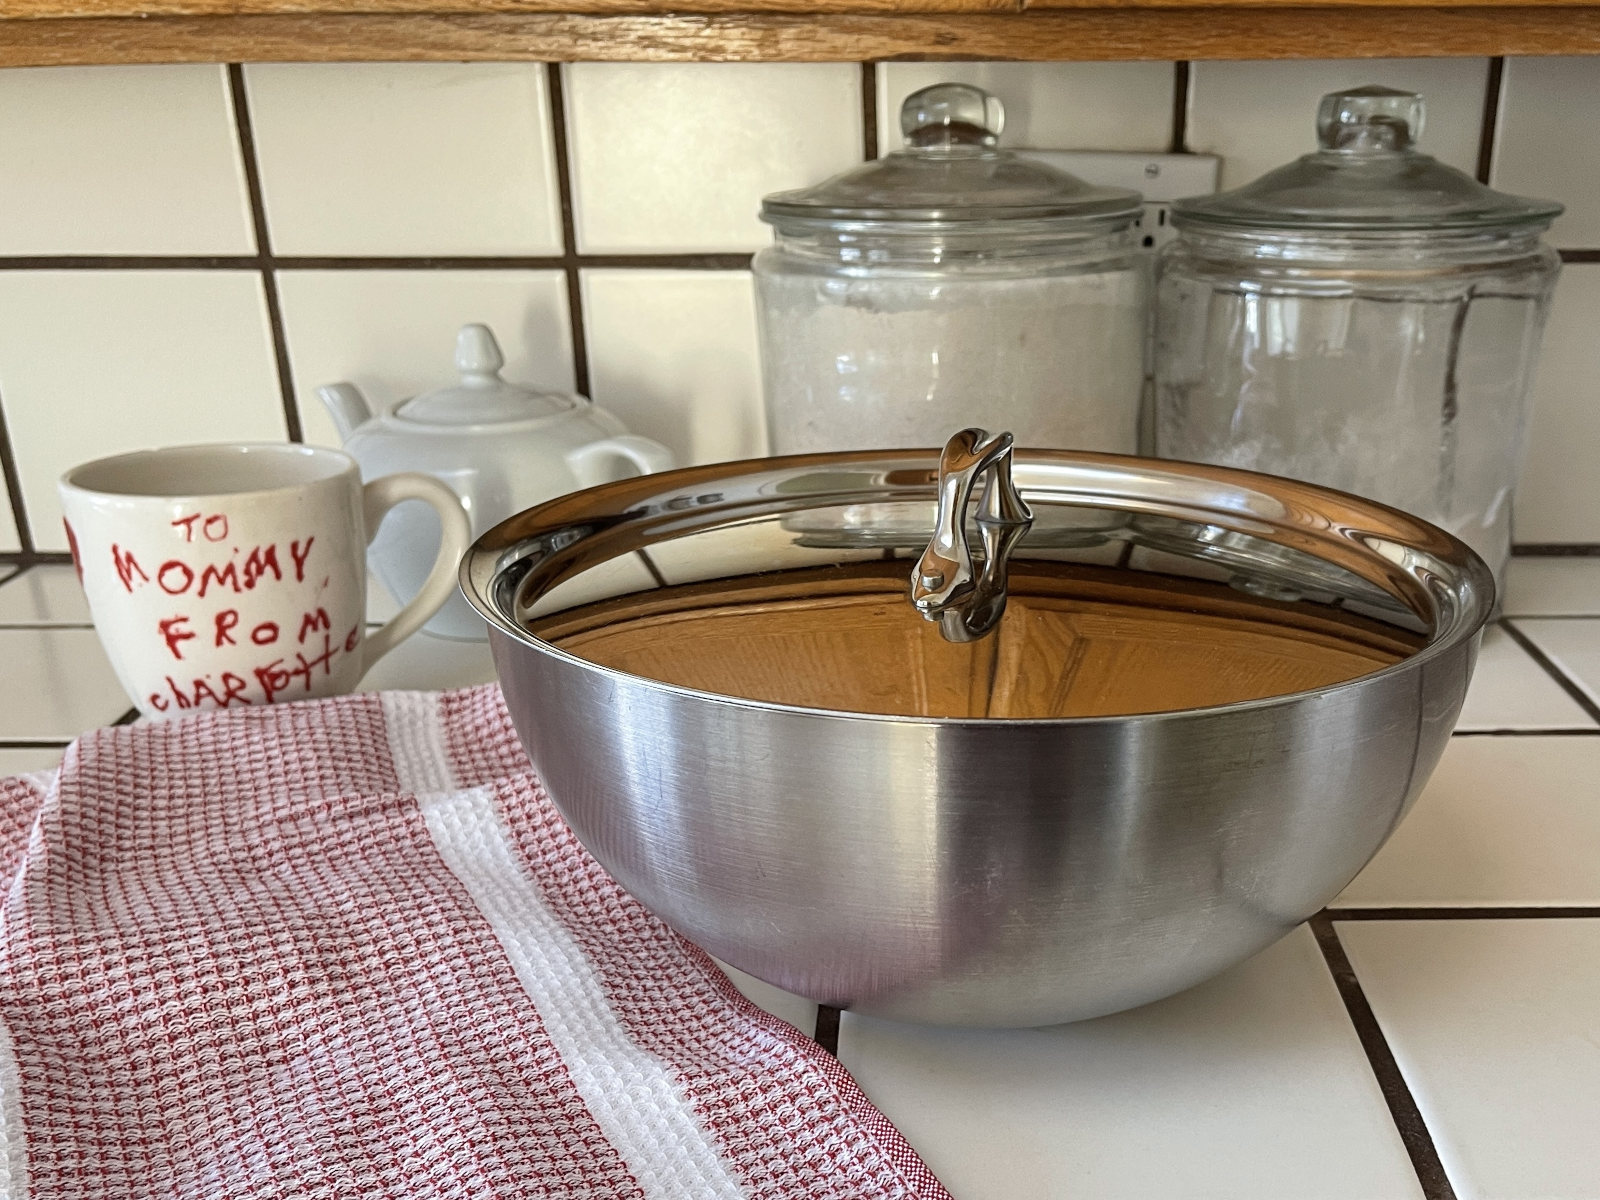 A large metal bowl of peanut butter cookie dough made with a sourdough discard flax egg sits on a white tiled counter to ferment. The bowl is covered with a metal pot lid. In the background are a red checked tea towel, a large mug, a teapot and two large jars of flour.